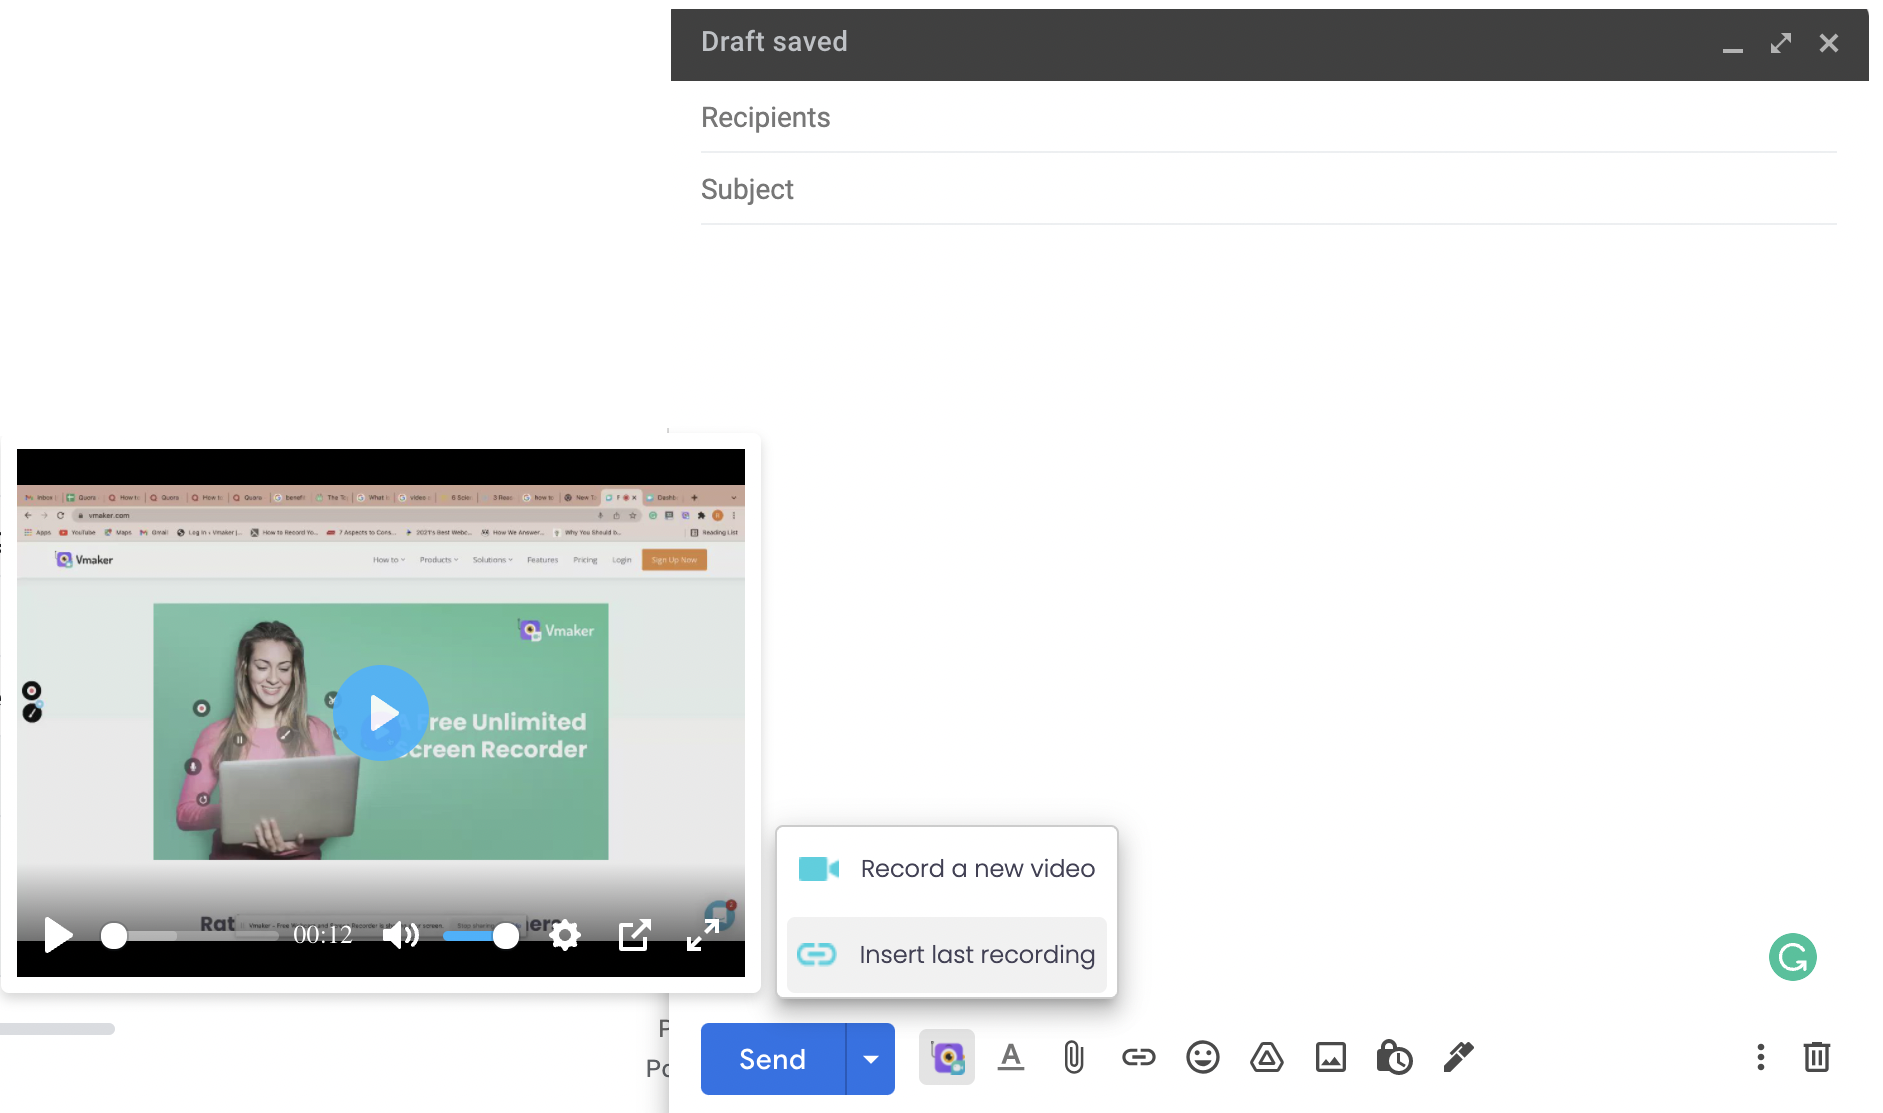 How to send a large video through Email: insert last recording